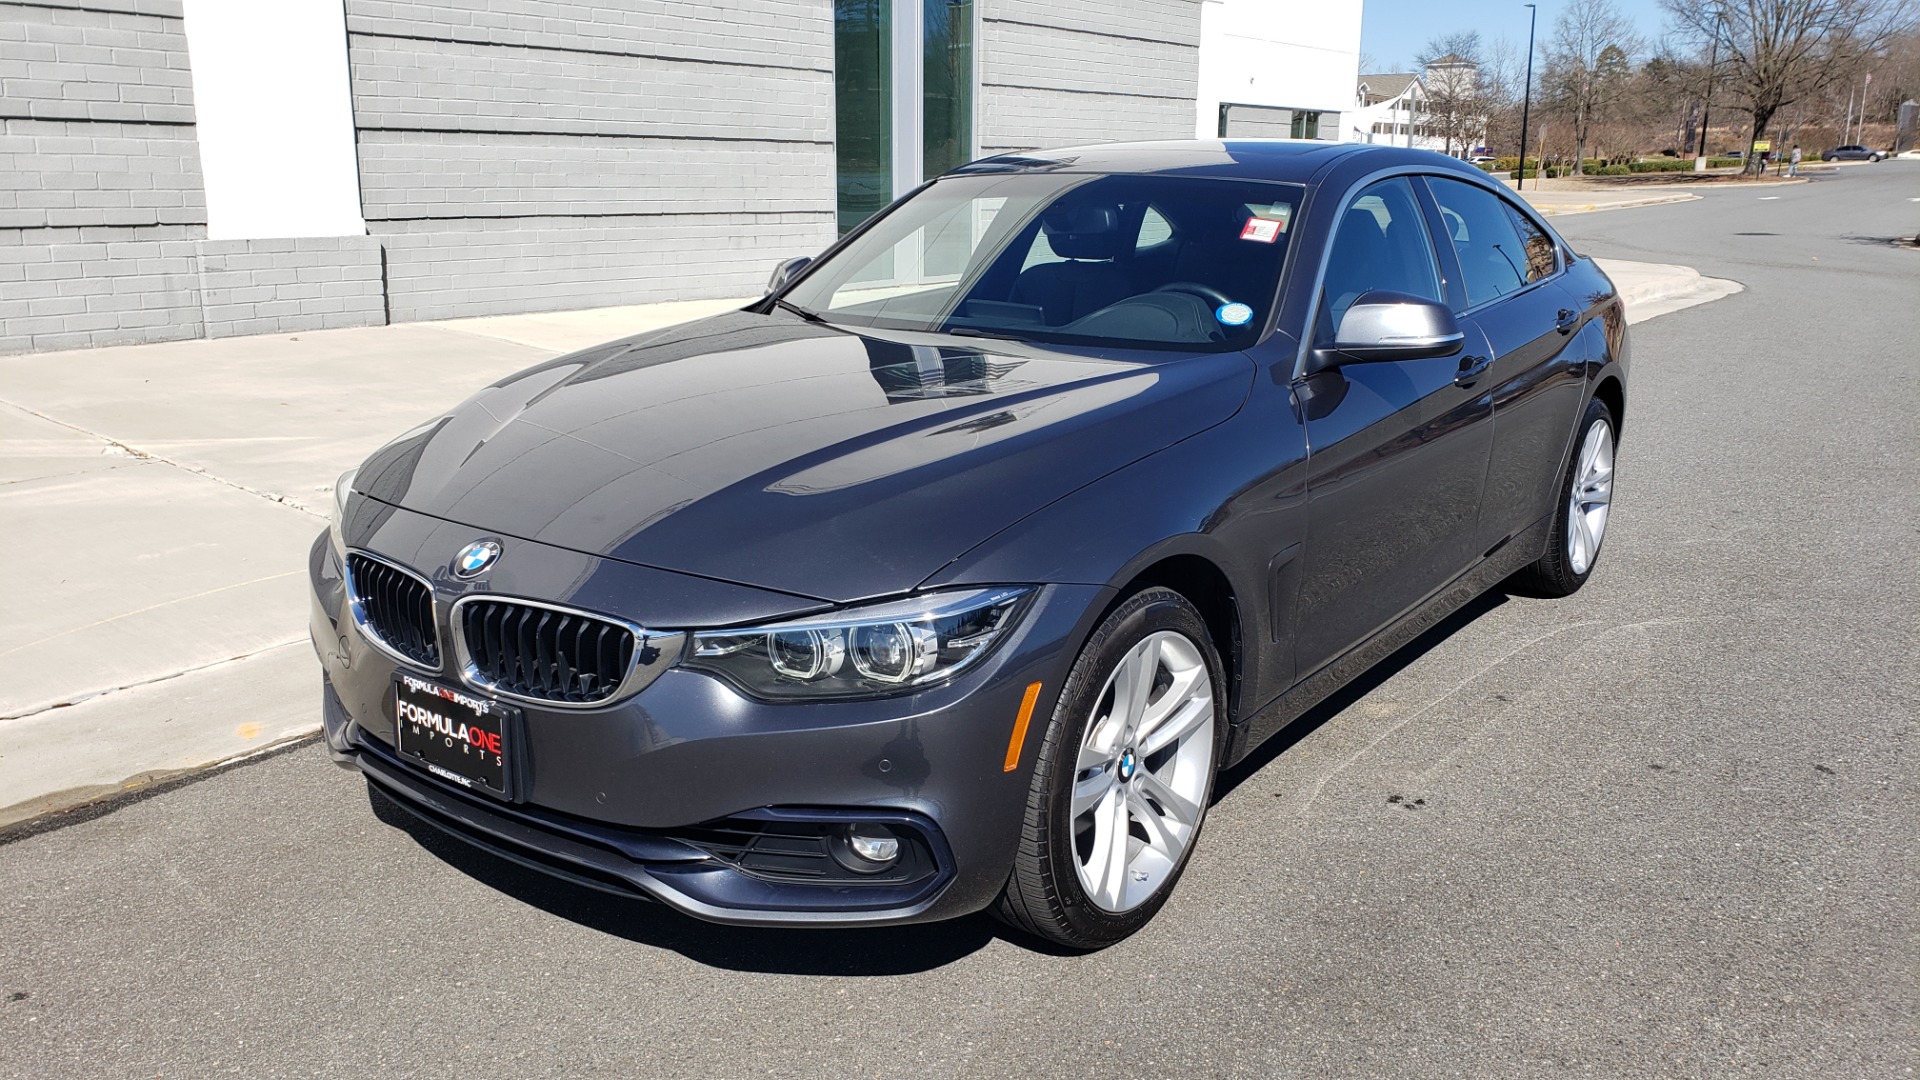 Used 2018 BMW 4 SERIES 430IXDRIVE / PREMIUM / NAV / SUNROOF / ESSENTIALS PKG for sale Sold at Formula Imports in Charlotte NC 28227 2